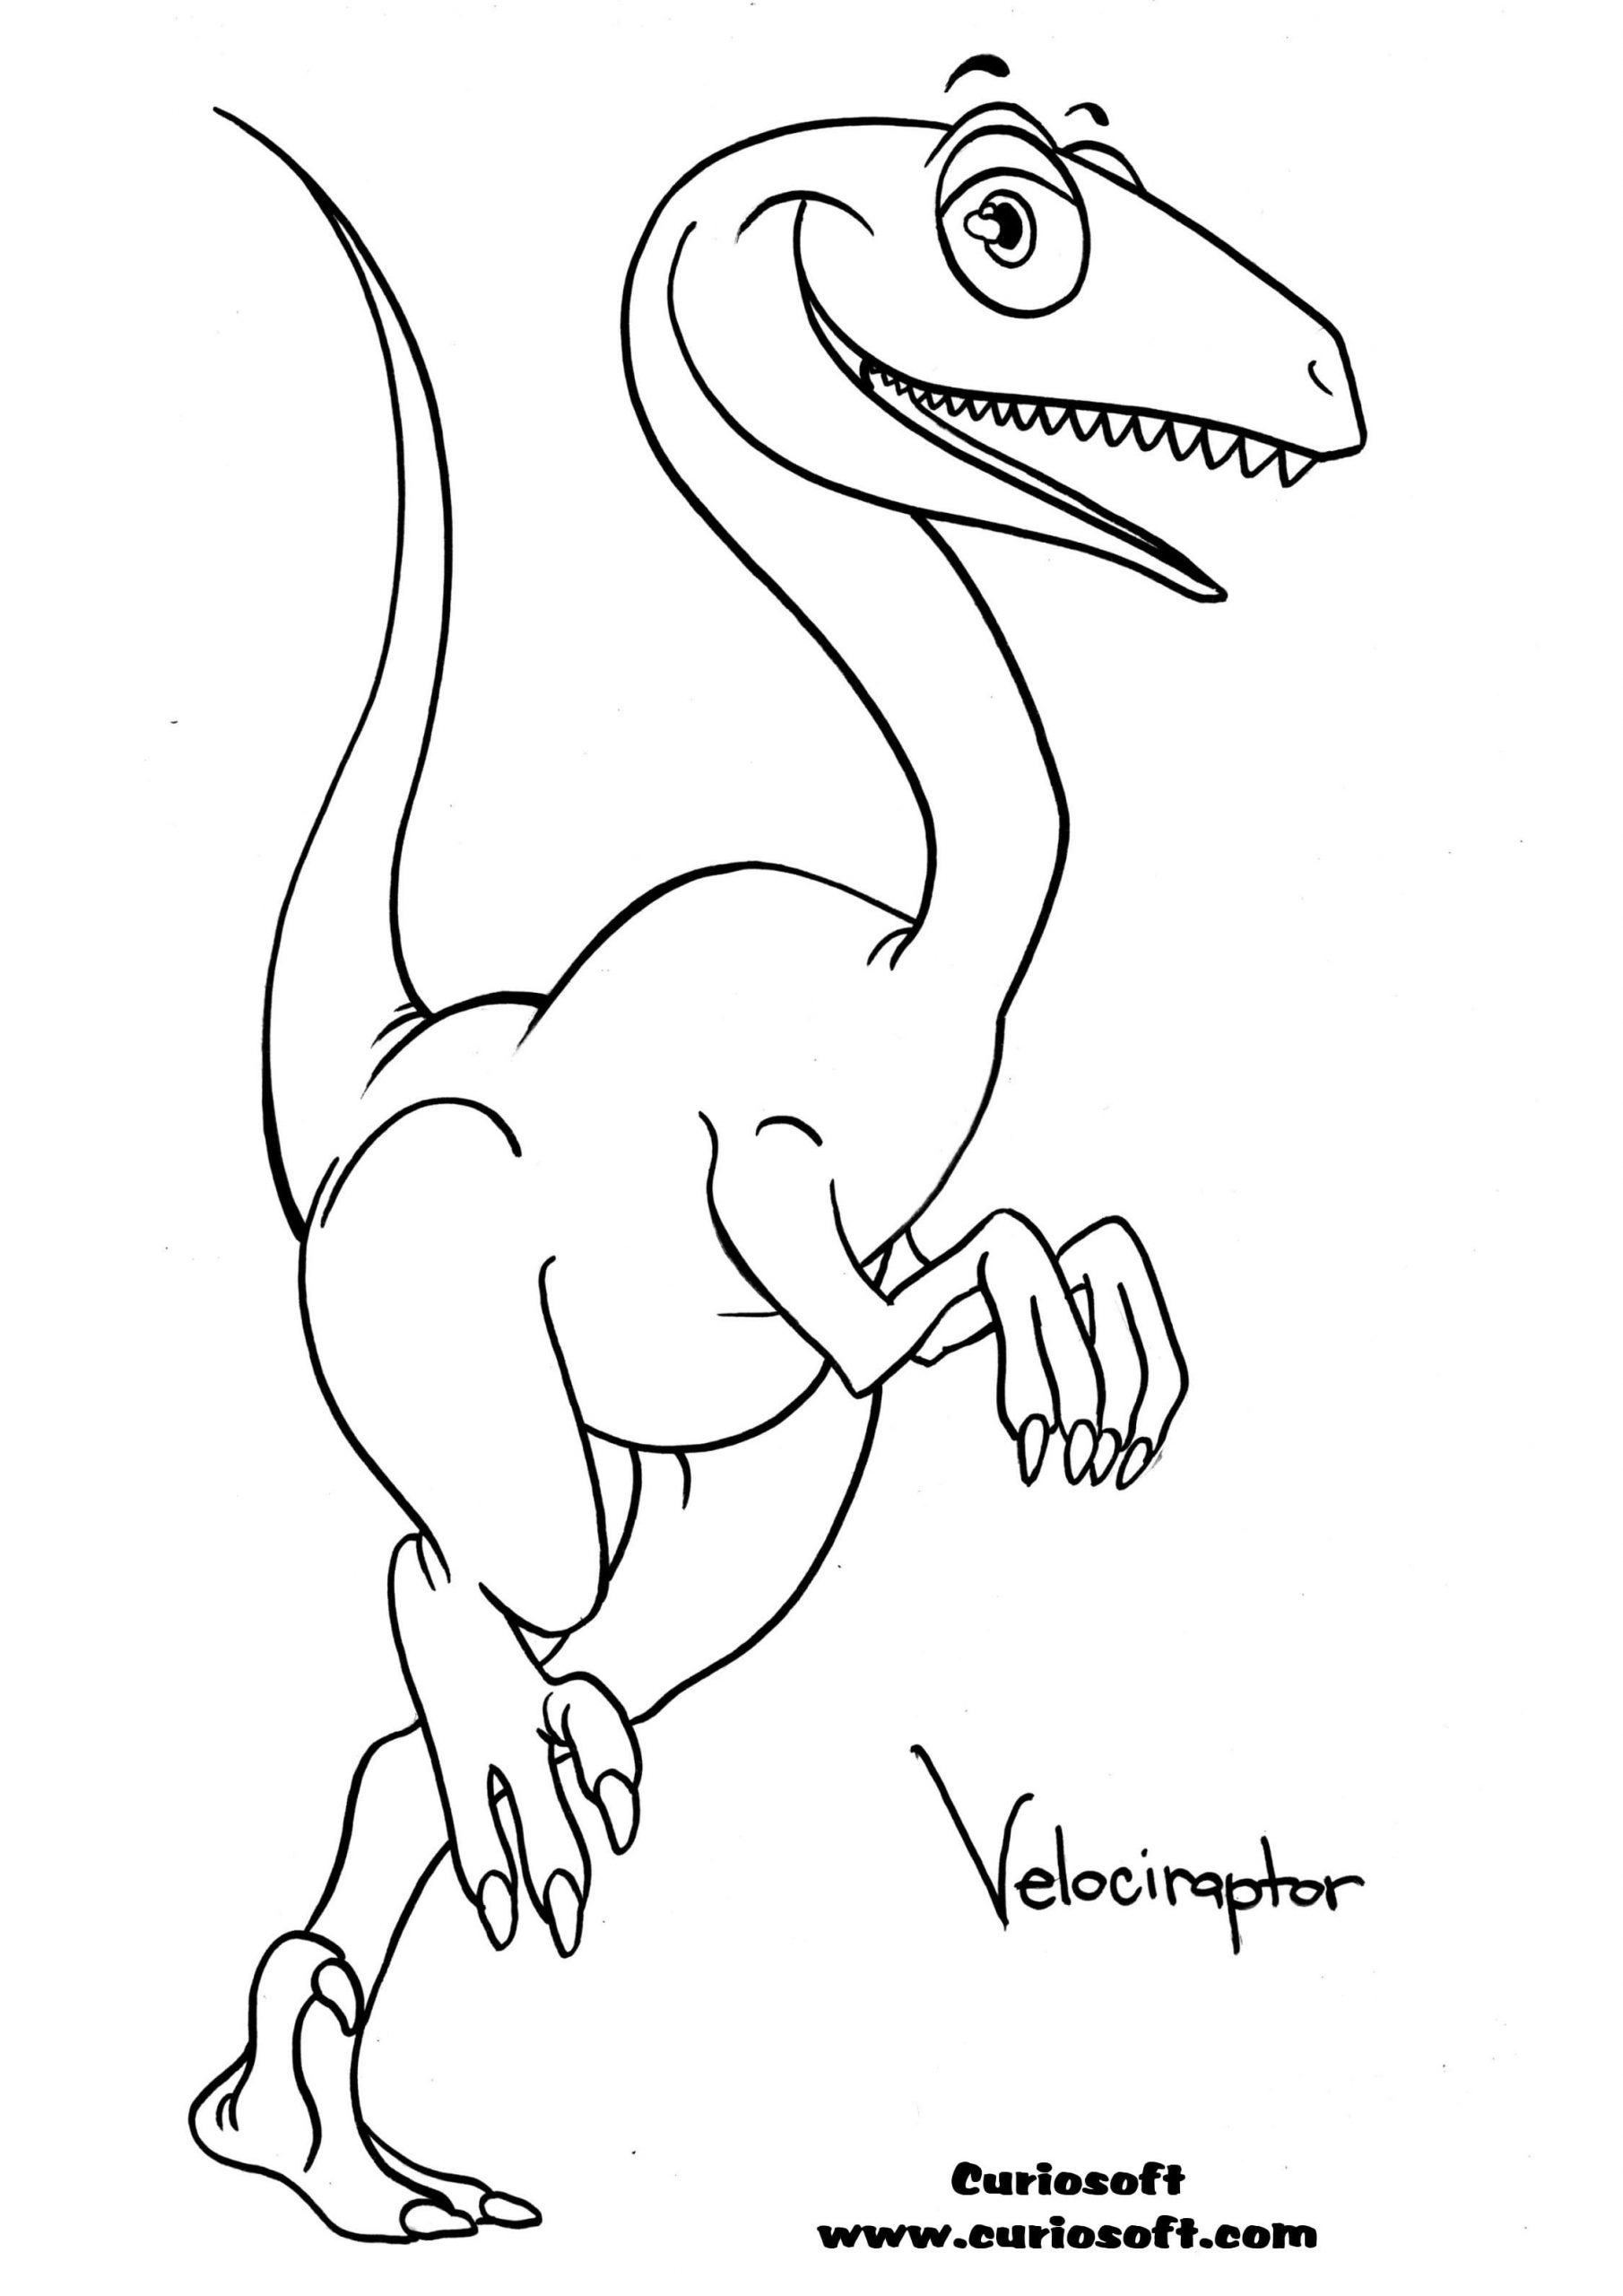 Velociraptor Coloring Pages For Kids Coloring Page